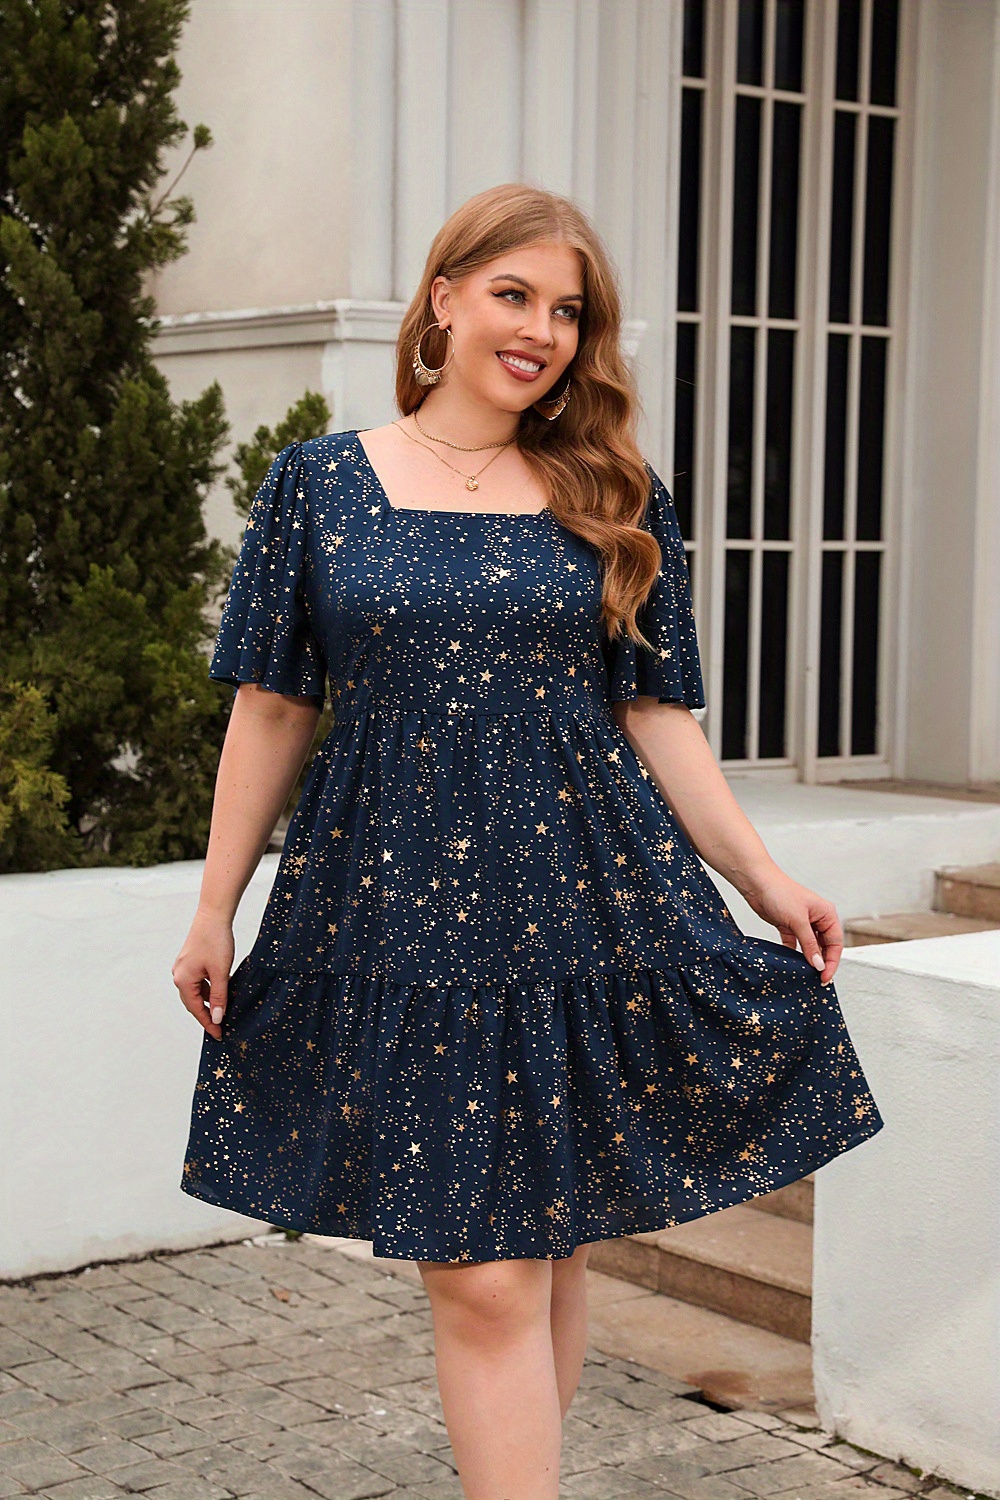 JAM Clothing - If you are looking for a fun plus size dress